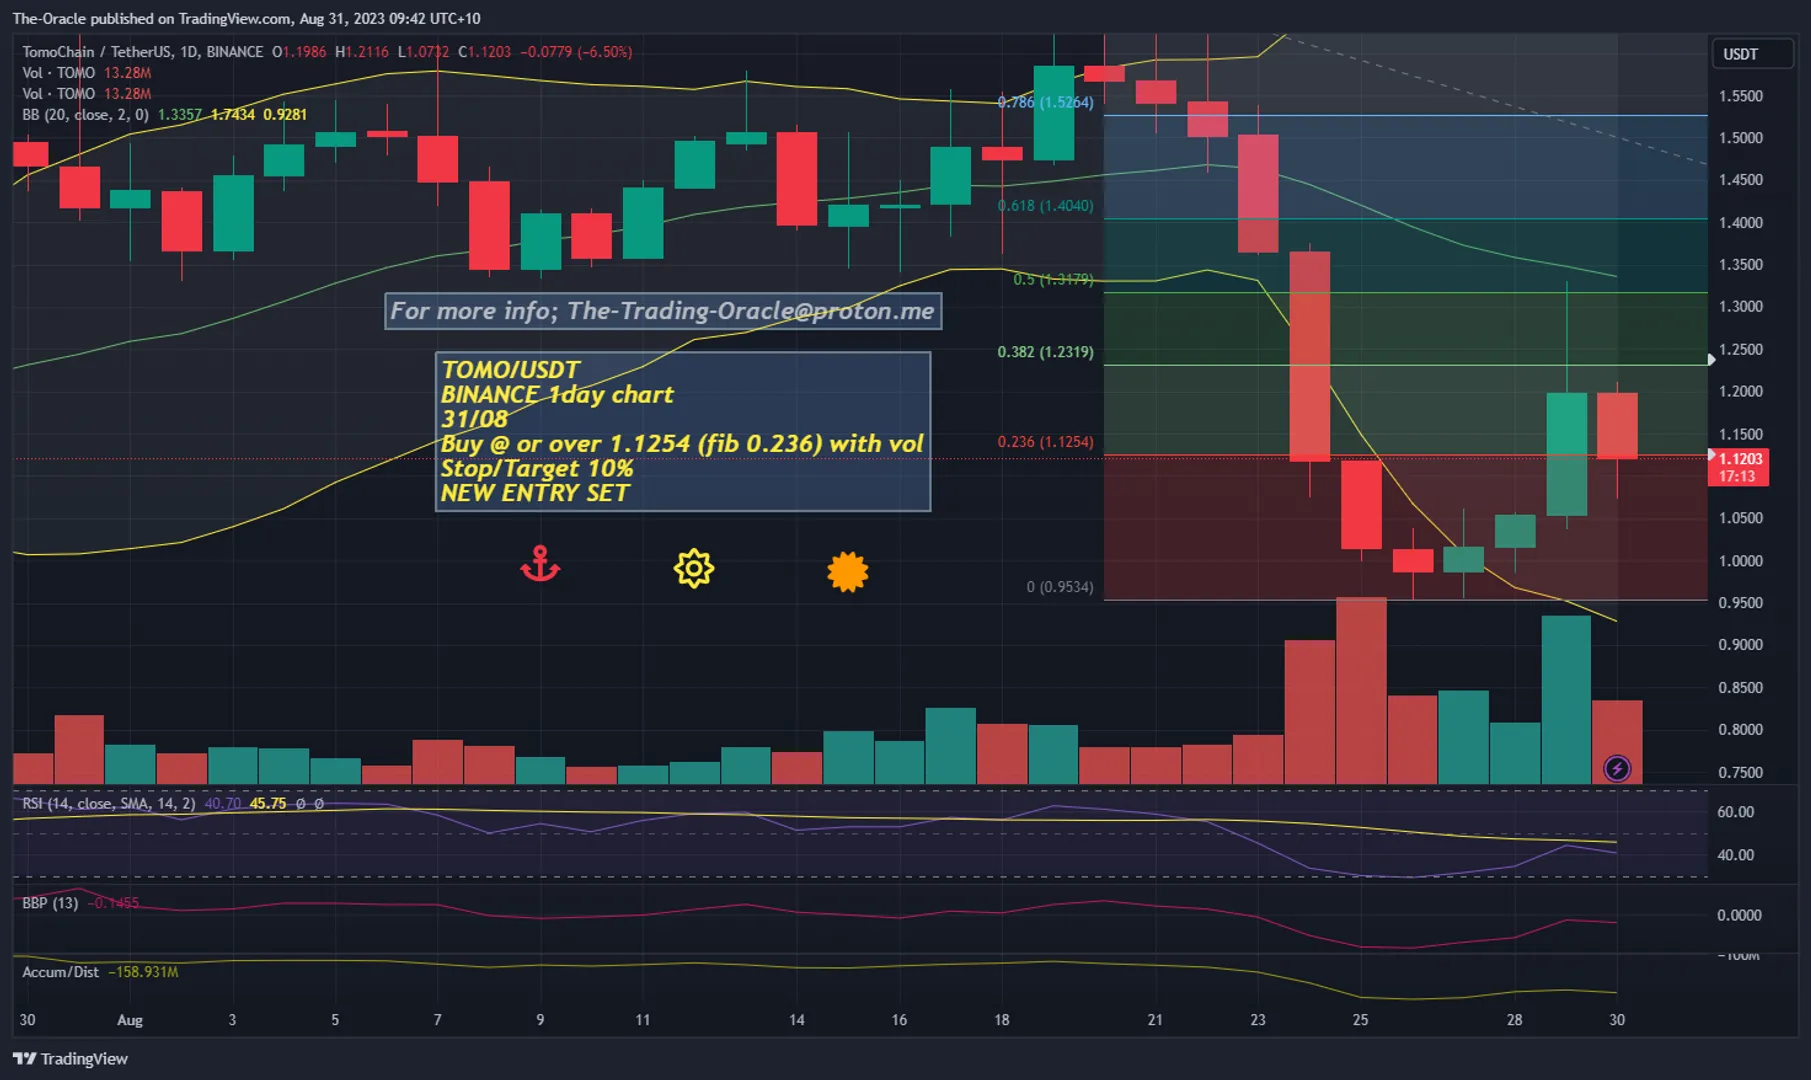 WATCHLIST ADJUSTMENT
TOMO/USDT
BINANCE 1day chart
31/08
Buy @ or over 1.1254 (fib 0.236) with vol
Stop/Target 10%
NEW ENTRY SET